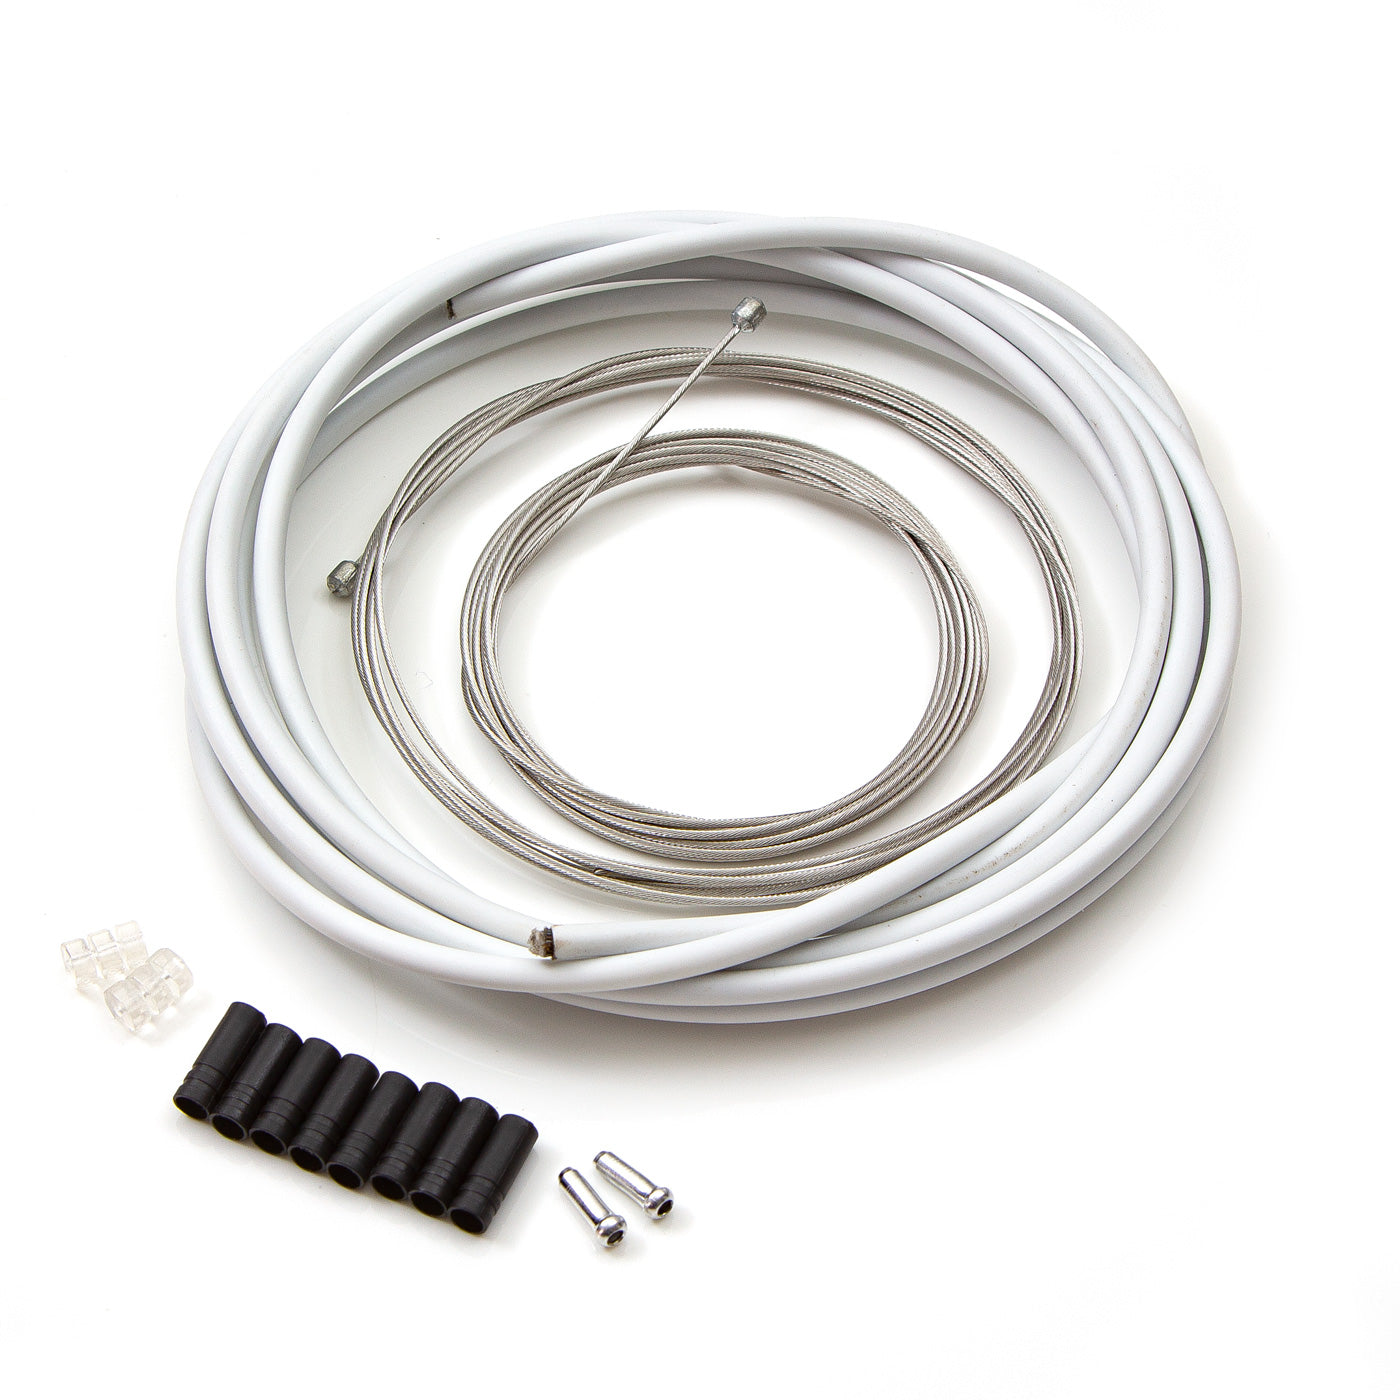 View Stainless Steel Universal Gear Cable Kit White information